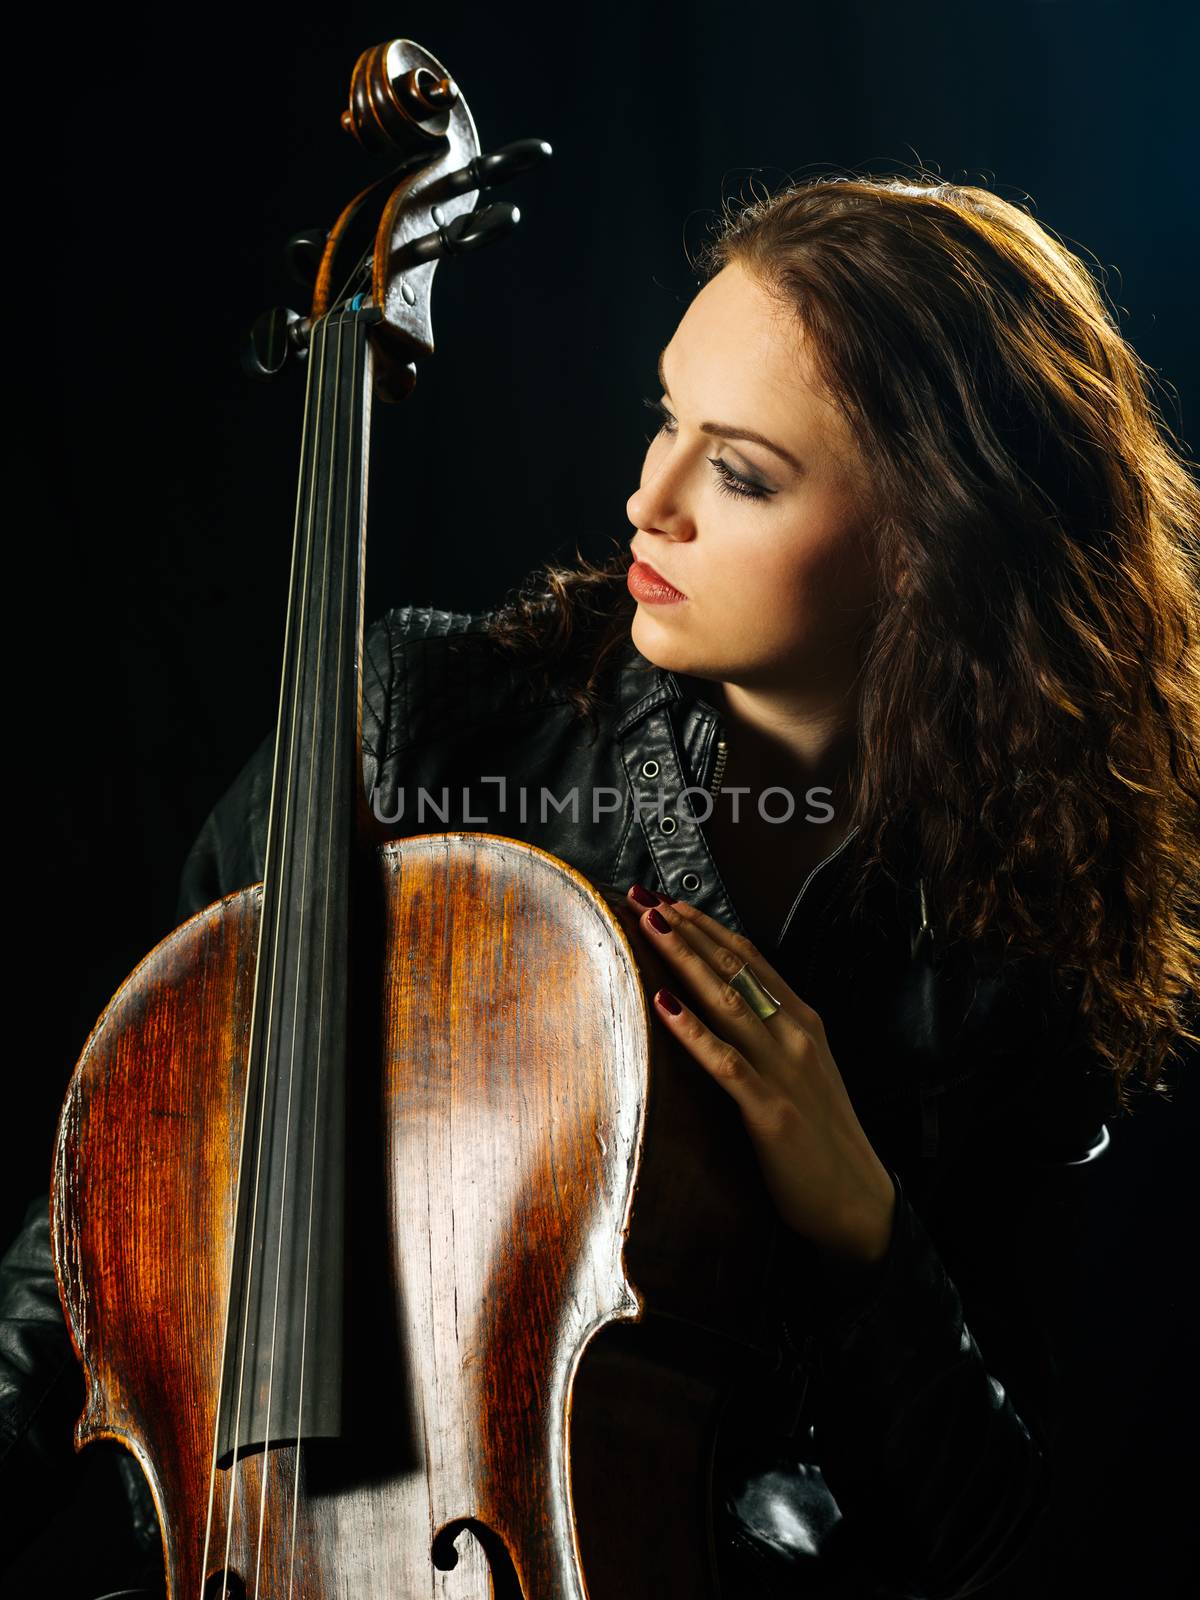 Cello player and her instrument by sumners